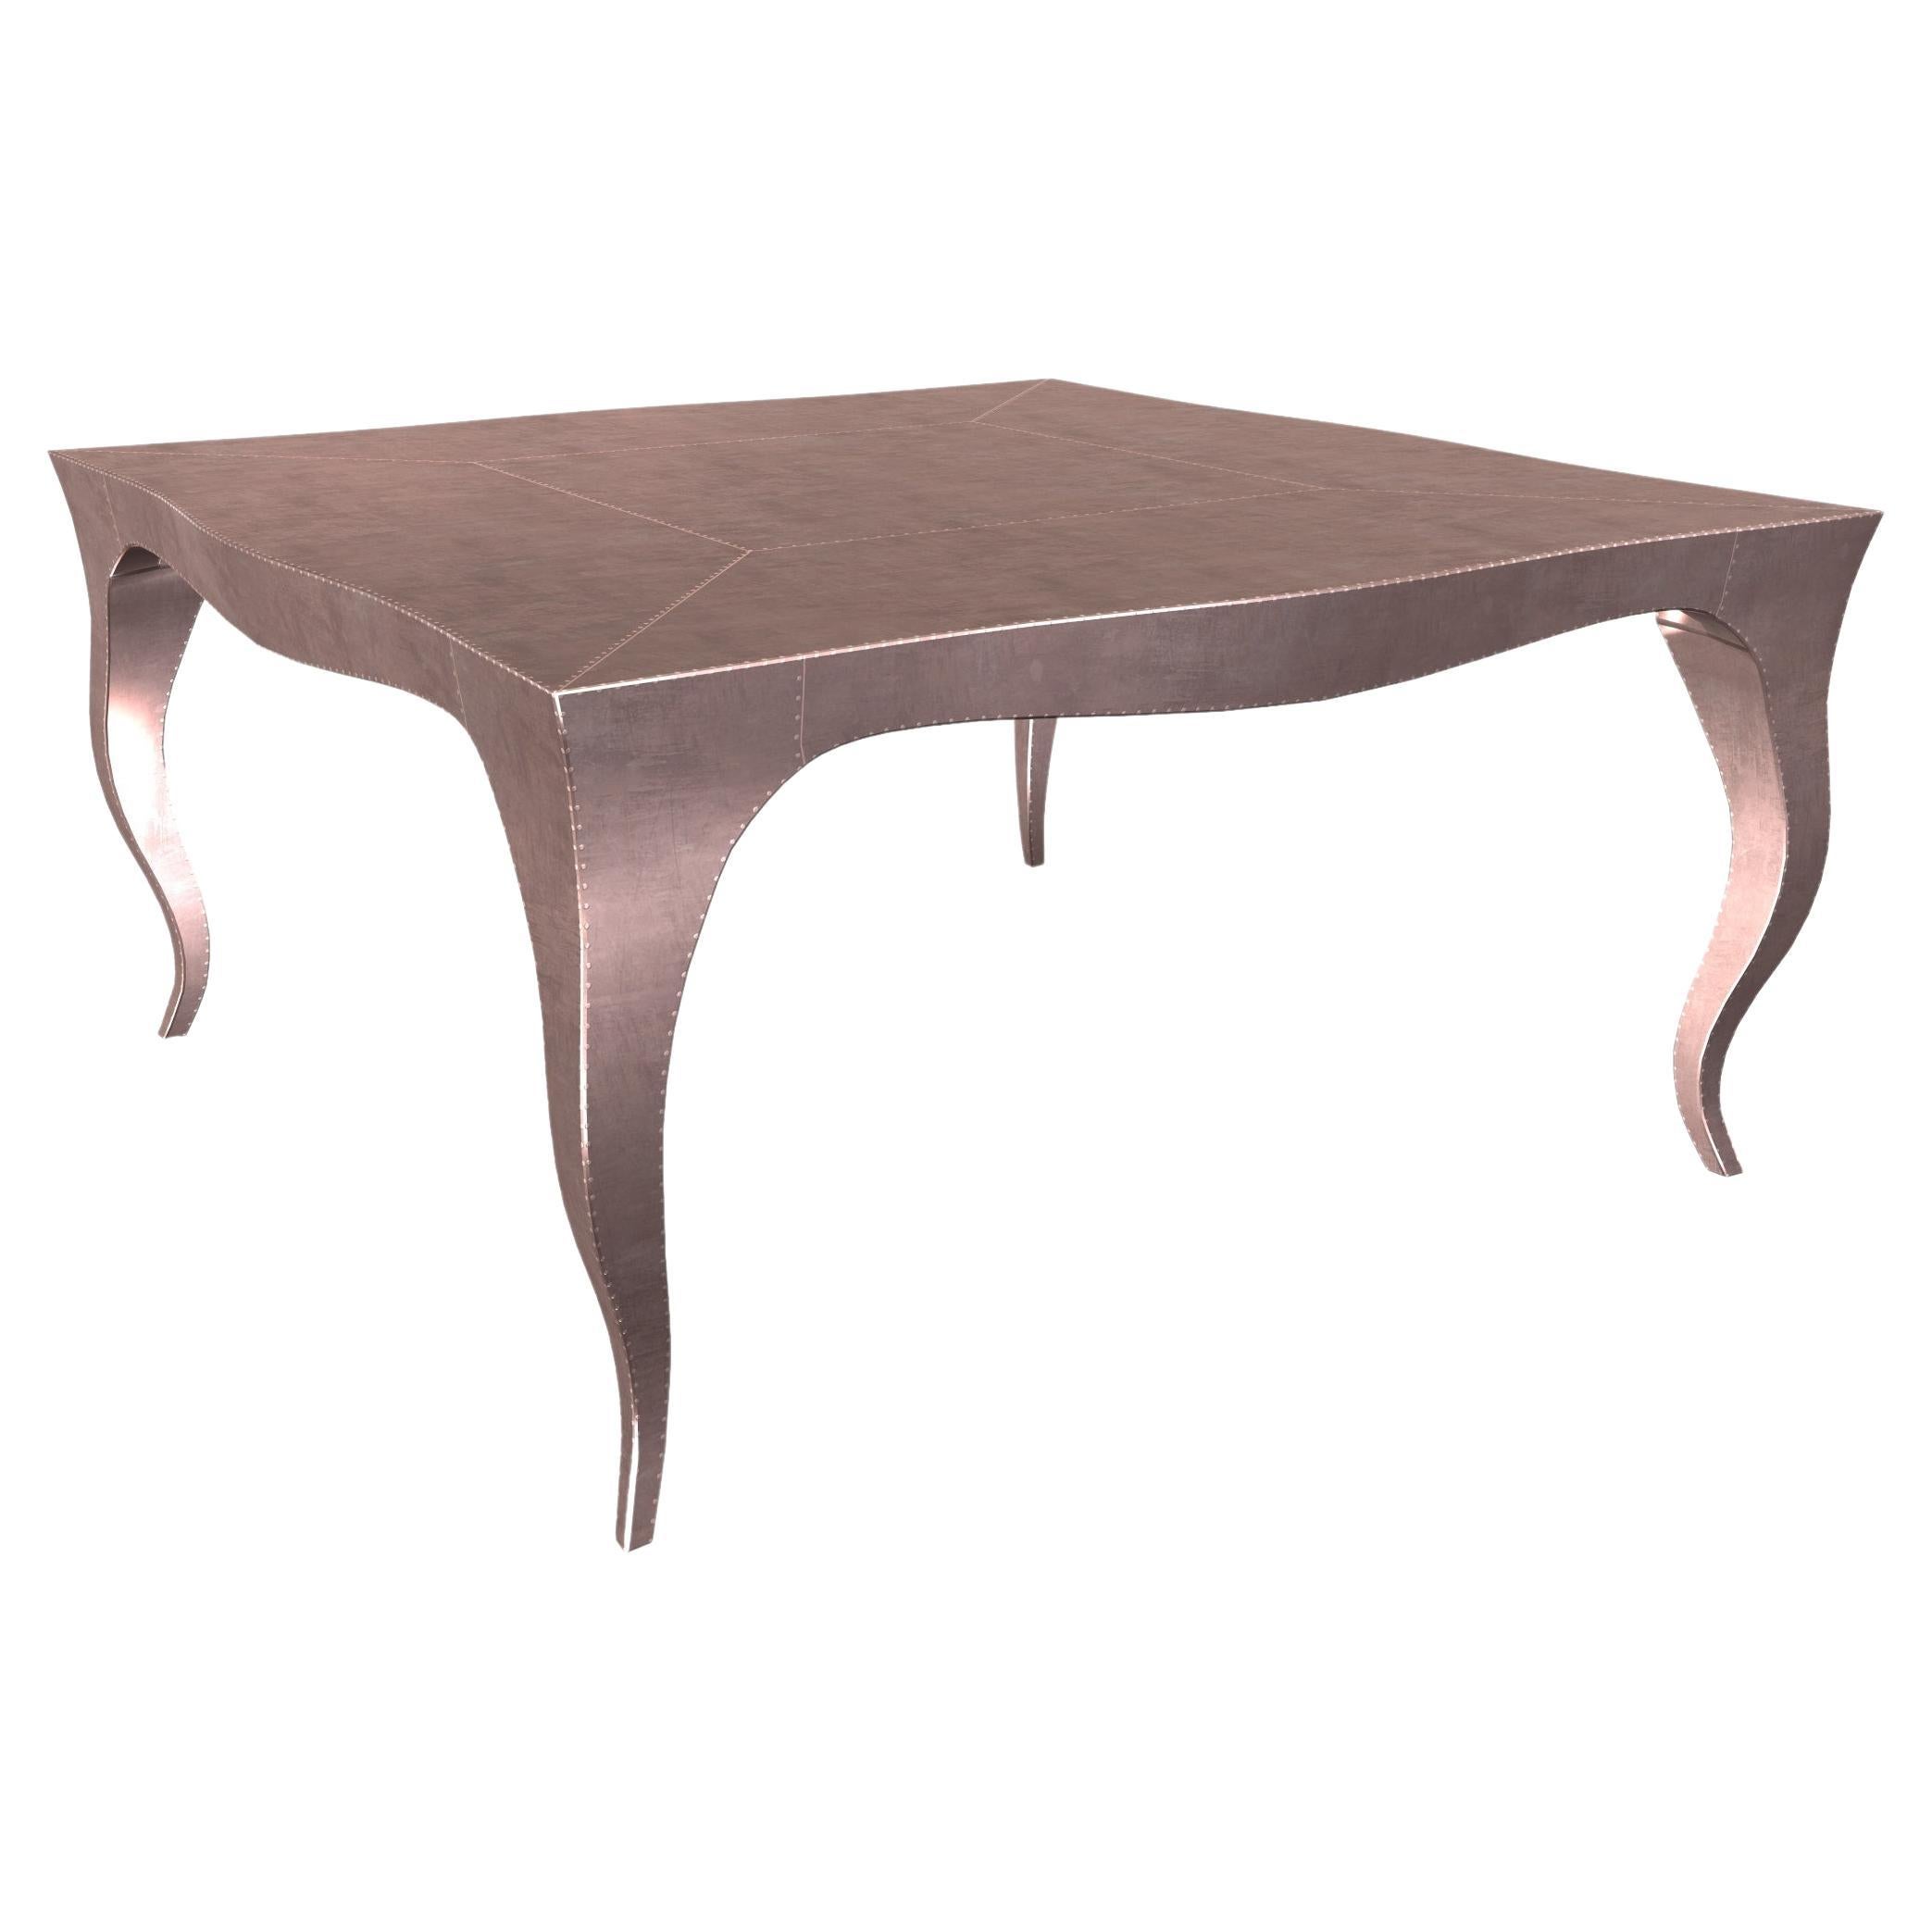 Louise Art Deco Center Tables Smooth Copper 18.5x18.5x10 inch by Paul Mathieu